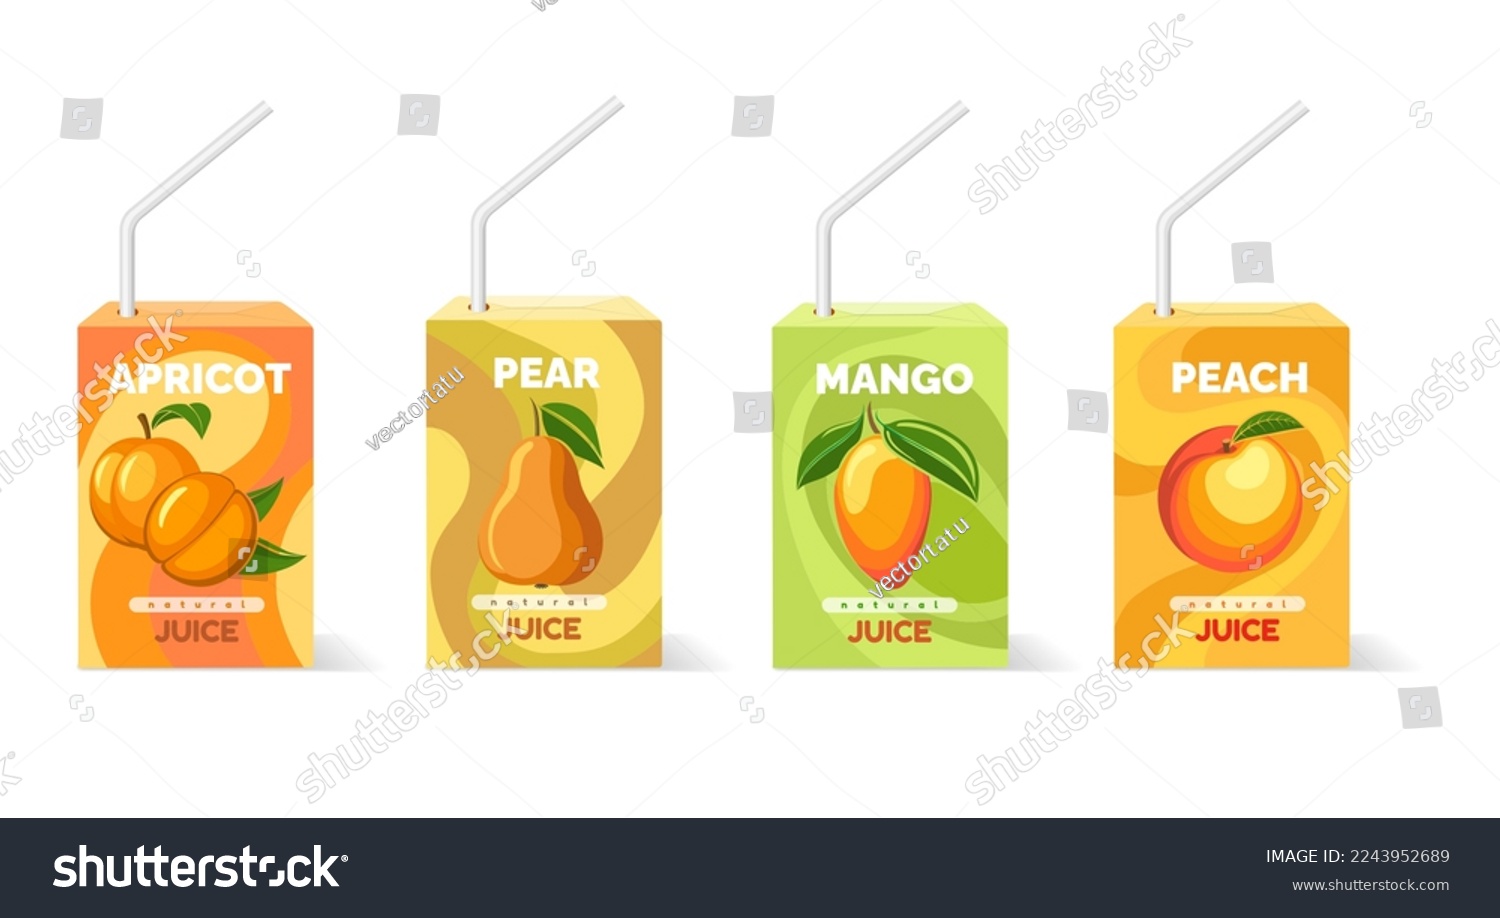 SVG of Fruit juice packets. Apricot pear mango peach juices packed boxes with straw pipes for kids and baby vector illustration isolated on white background svg